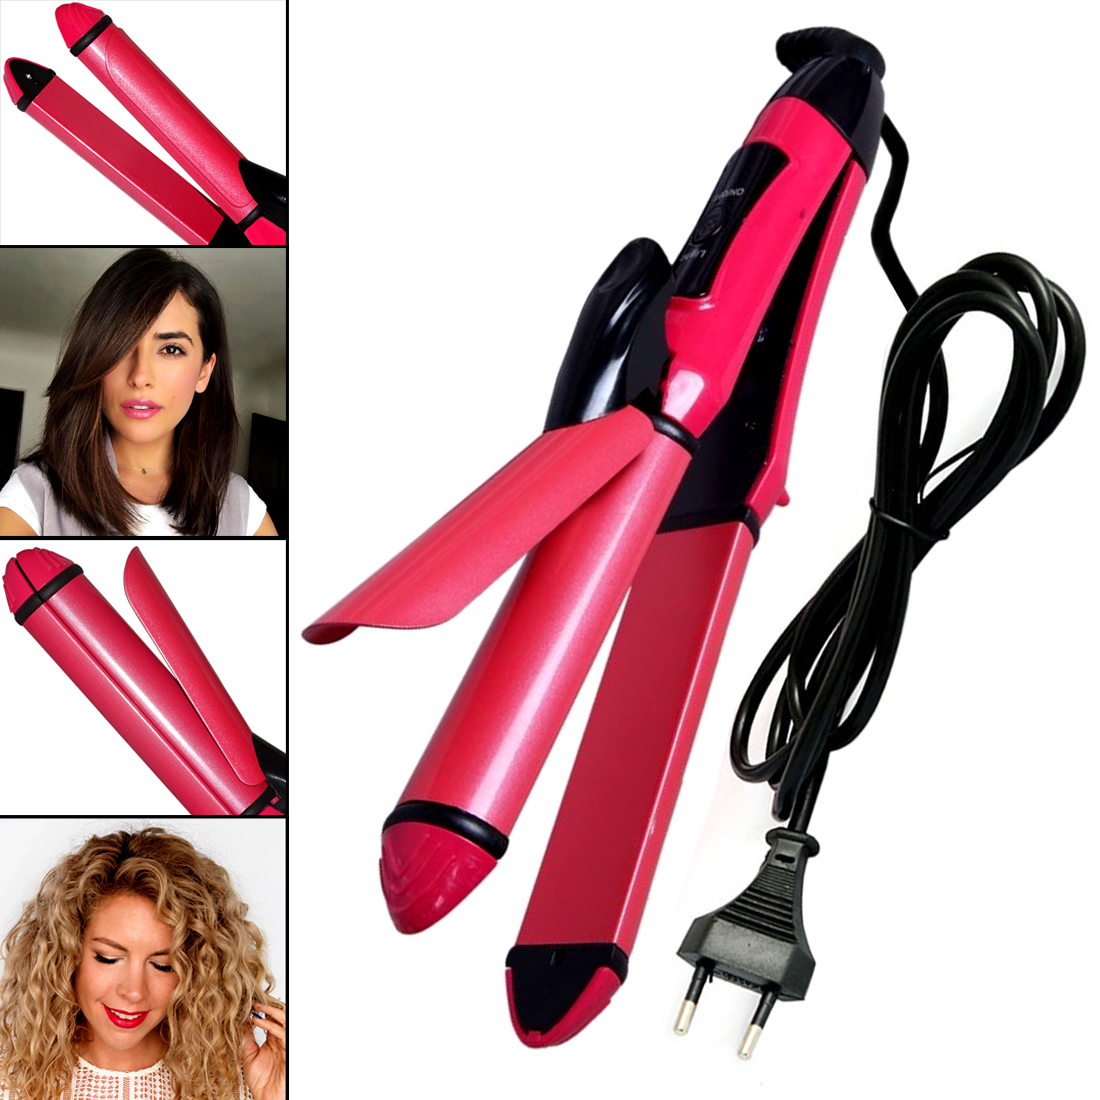 2in1 Professional Solid Ceramic Hair Straightener Flat Iron Anti Static Hair Curler Curling Iron Rod Styling Roller 35W